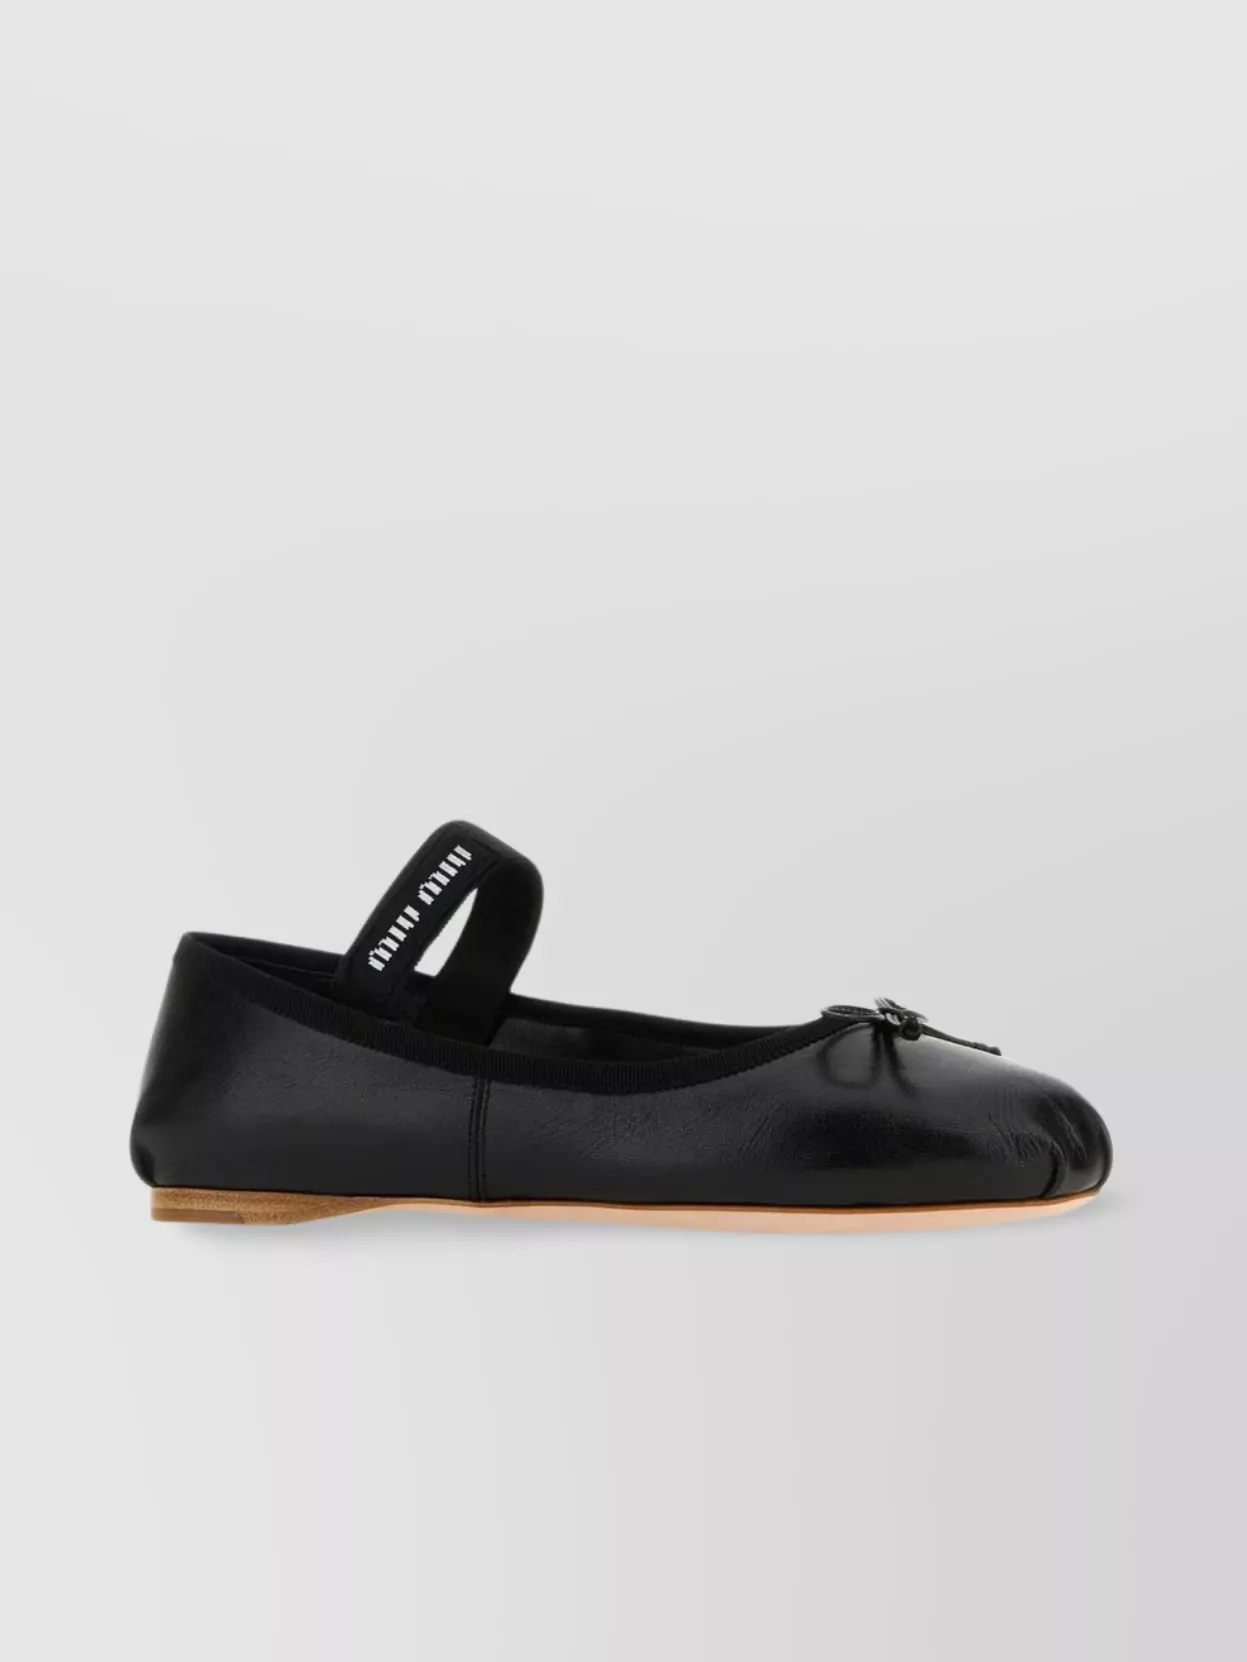 MIU MIU LEATHER BALLERINAS WITH ROUND TOE AND BOW